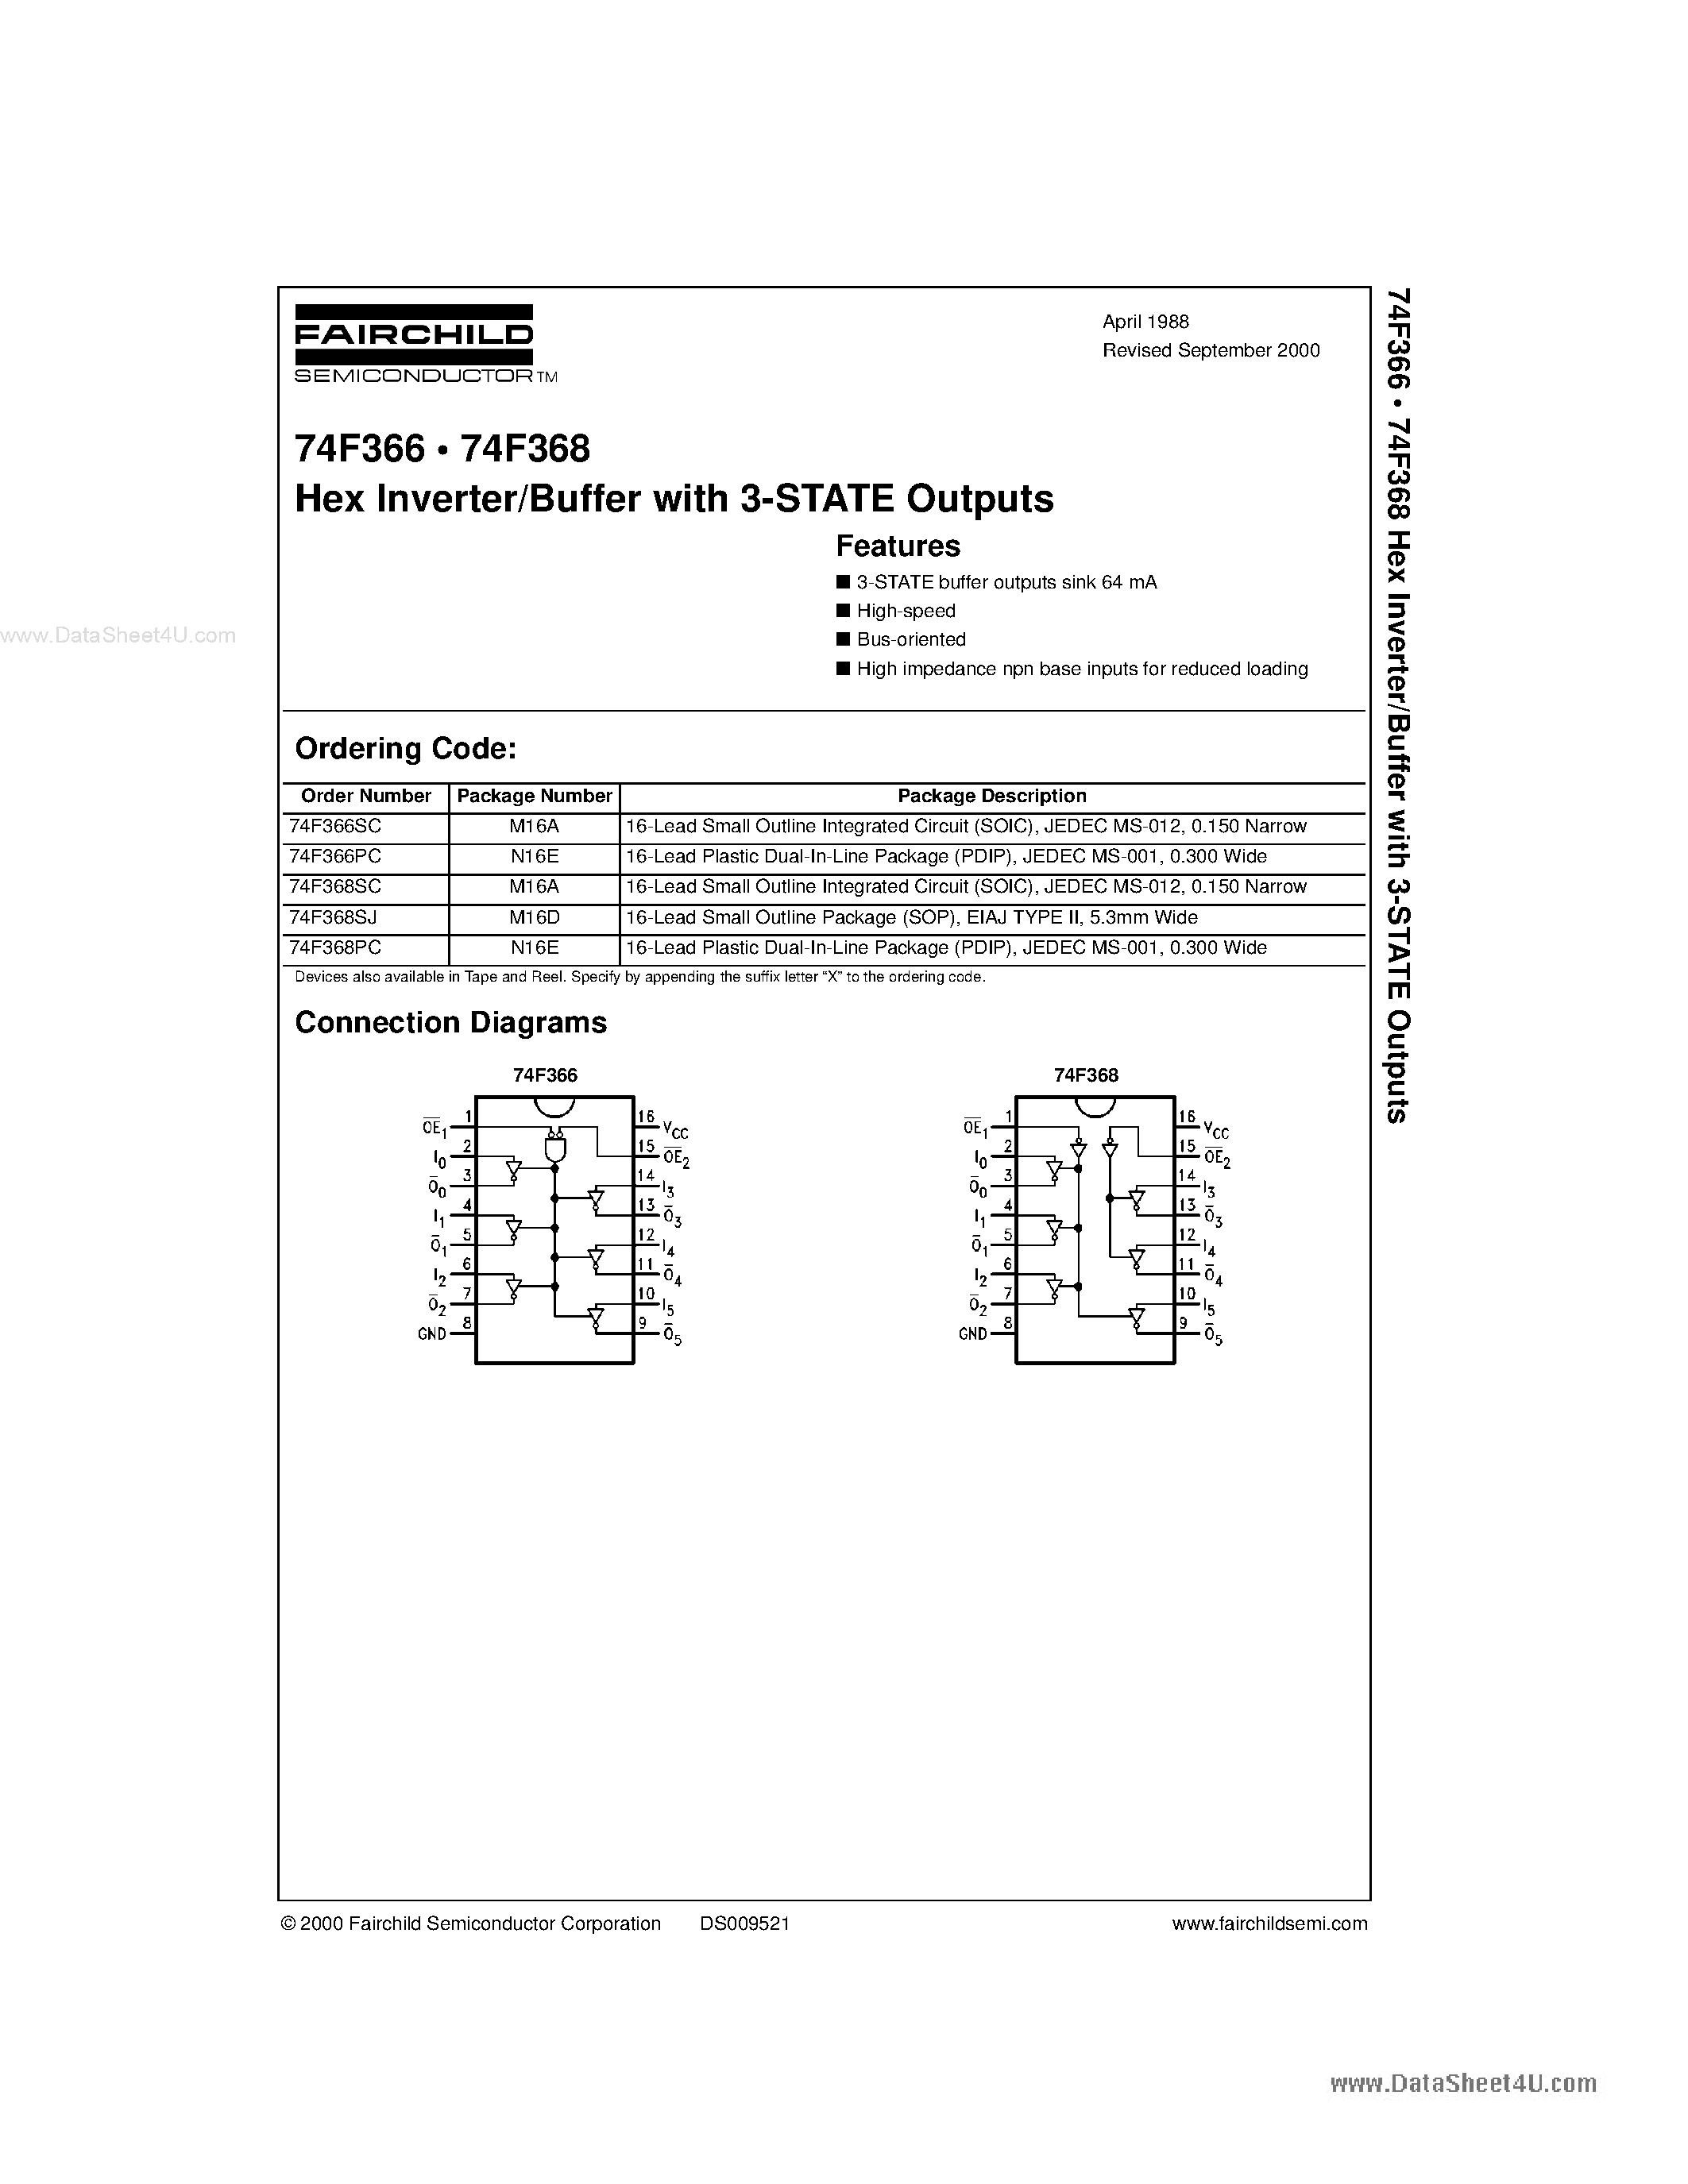 Datasheet 74F366 - (74F366 / 74F368) Hex Inverter / Buffer with 3-State Outputs page 1